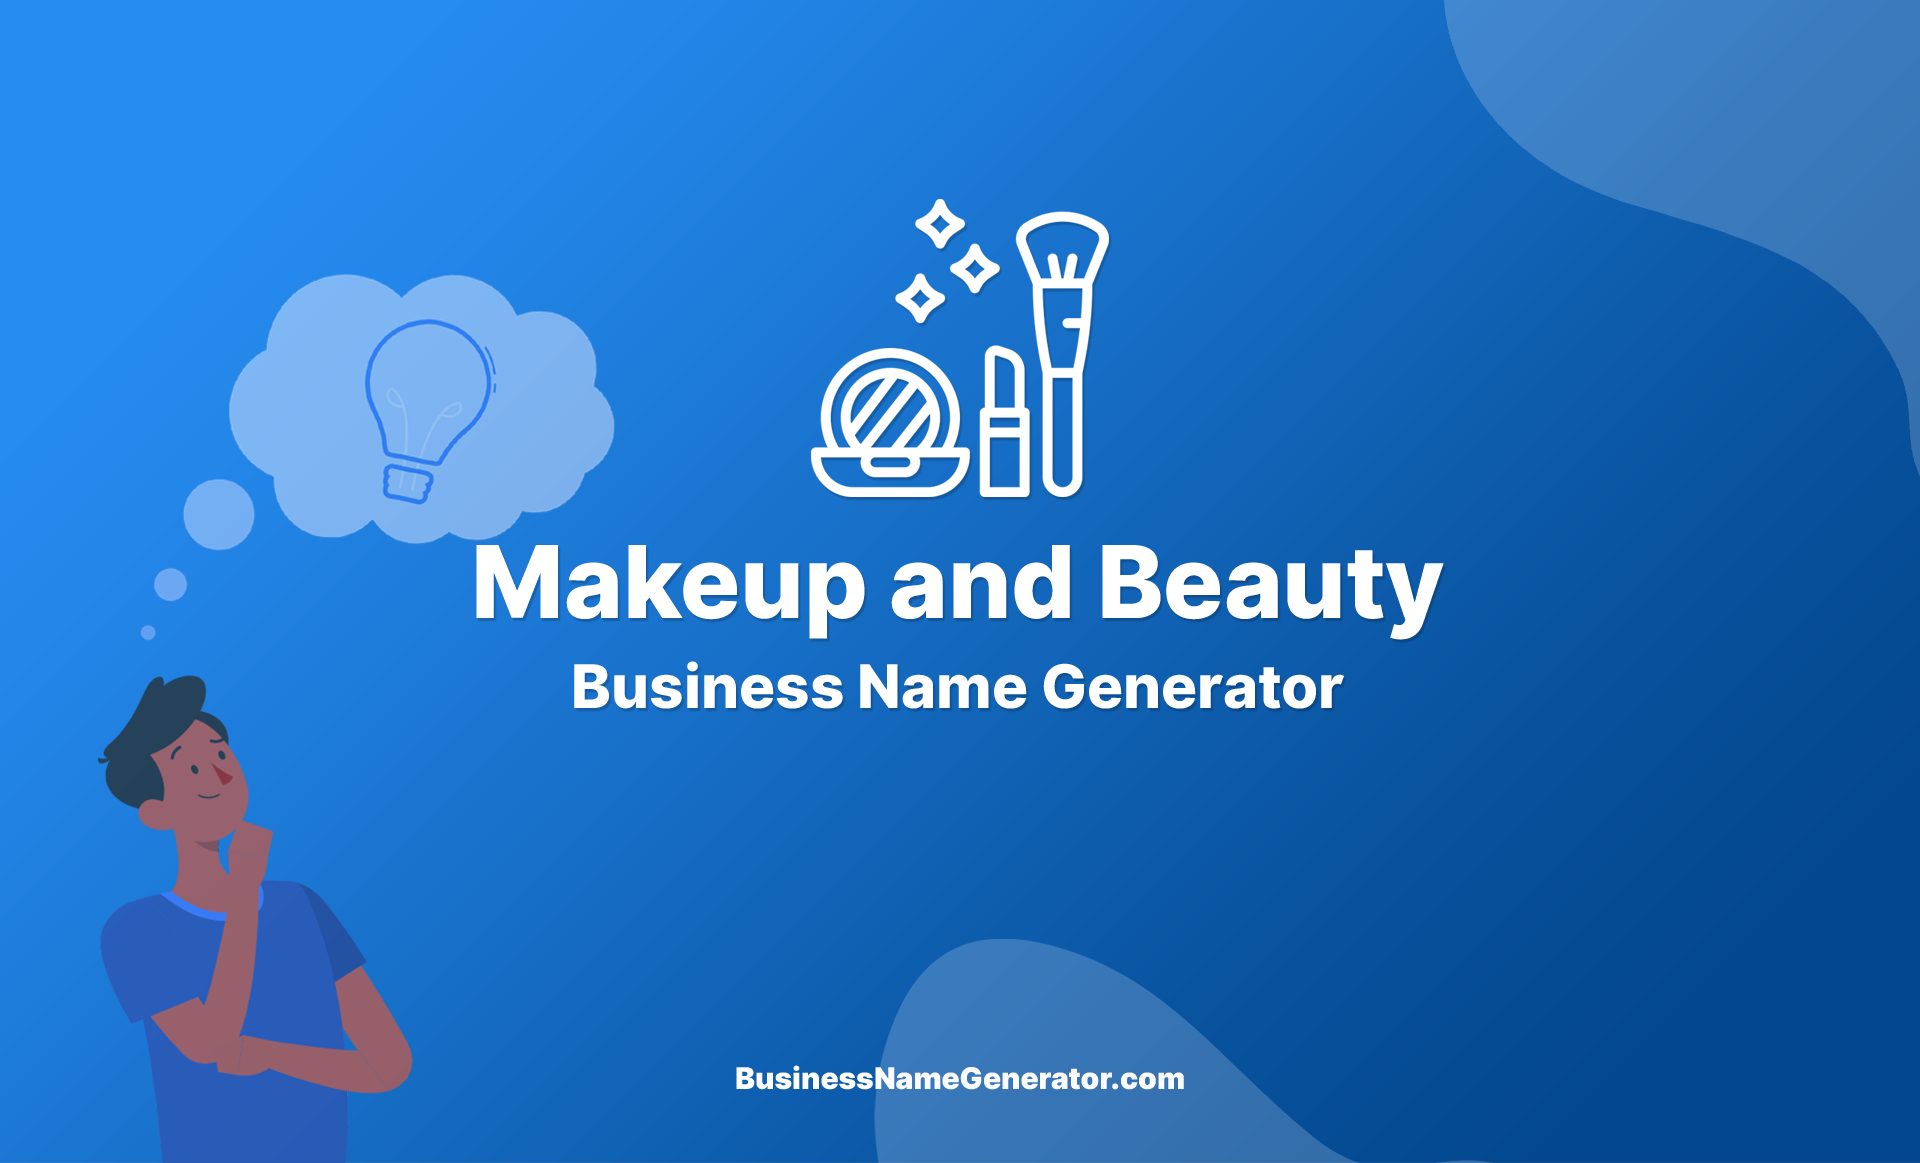 Makeup and Beauty Business Name Generator